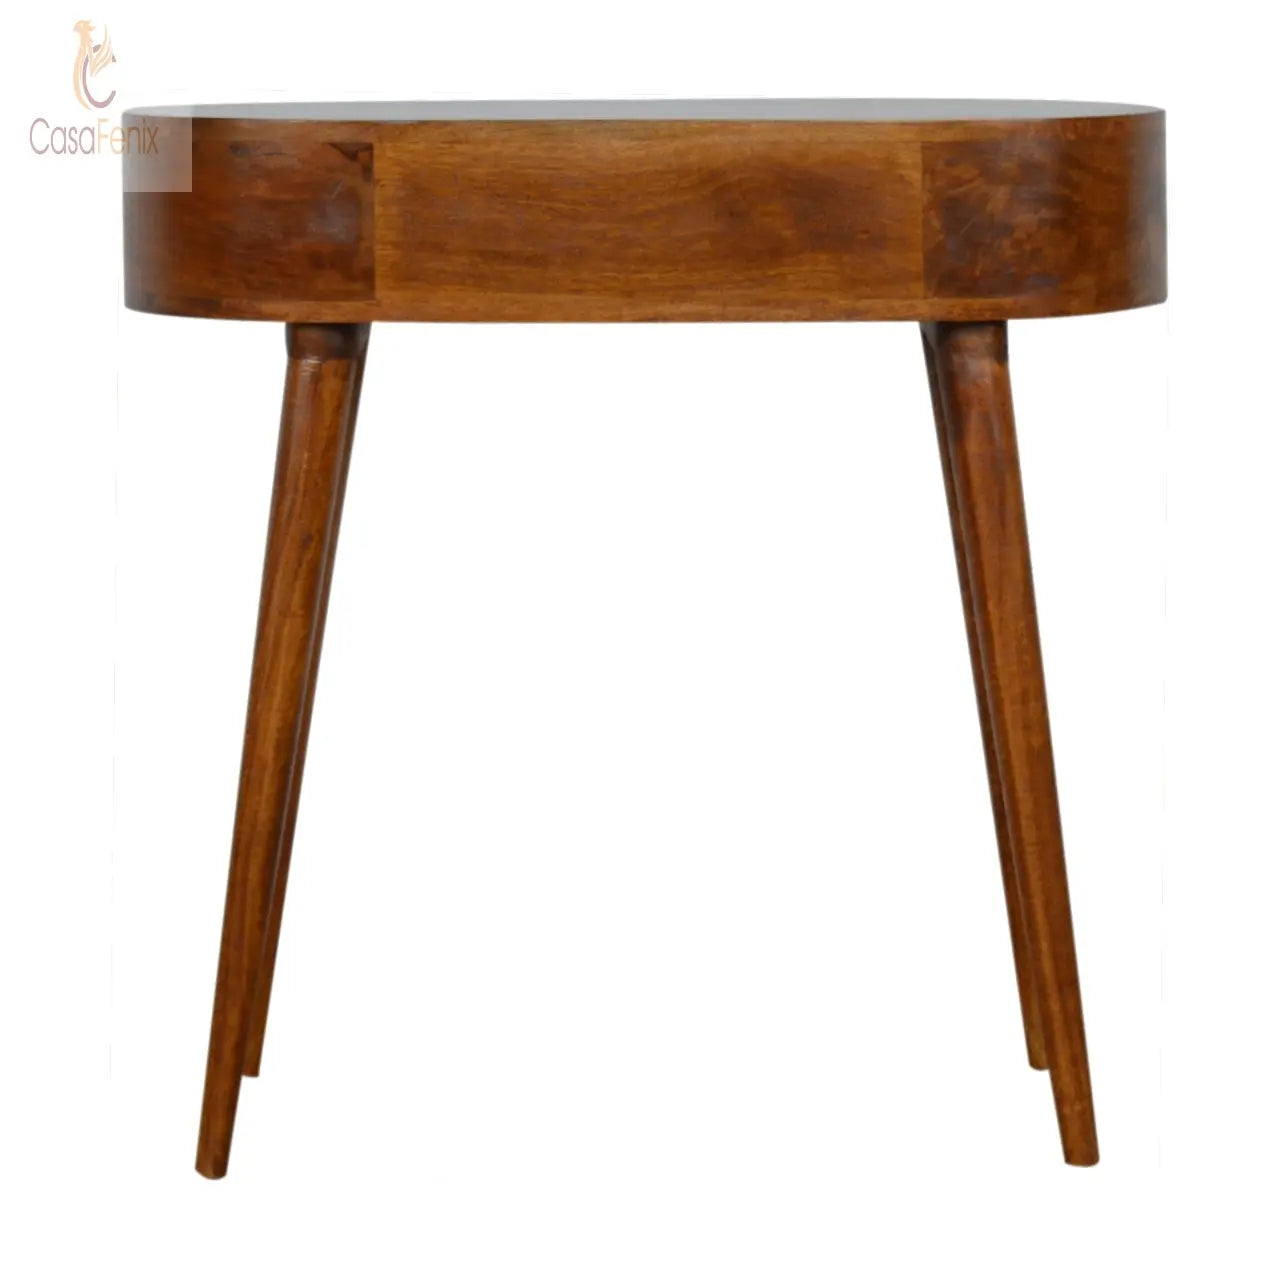 Chestnut Rounded Small 1 Drawer Console Table Solid Wood - CasaFenix